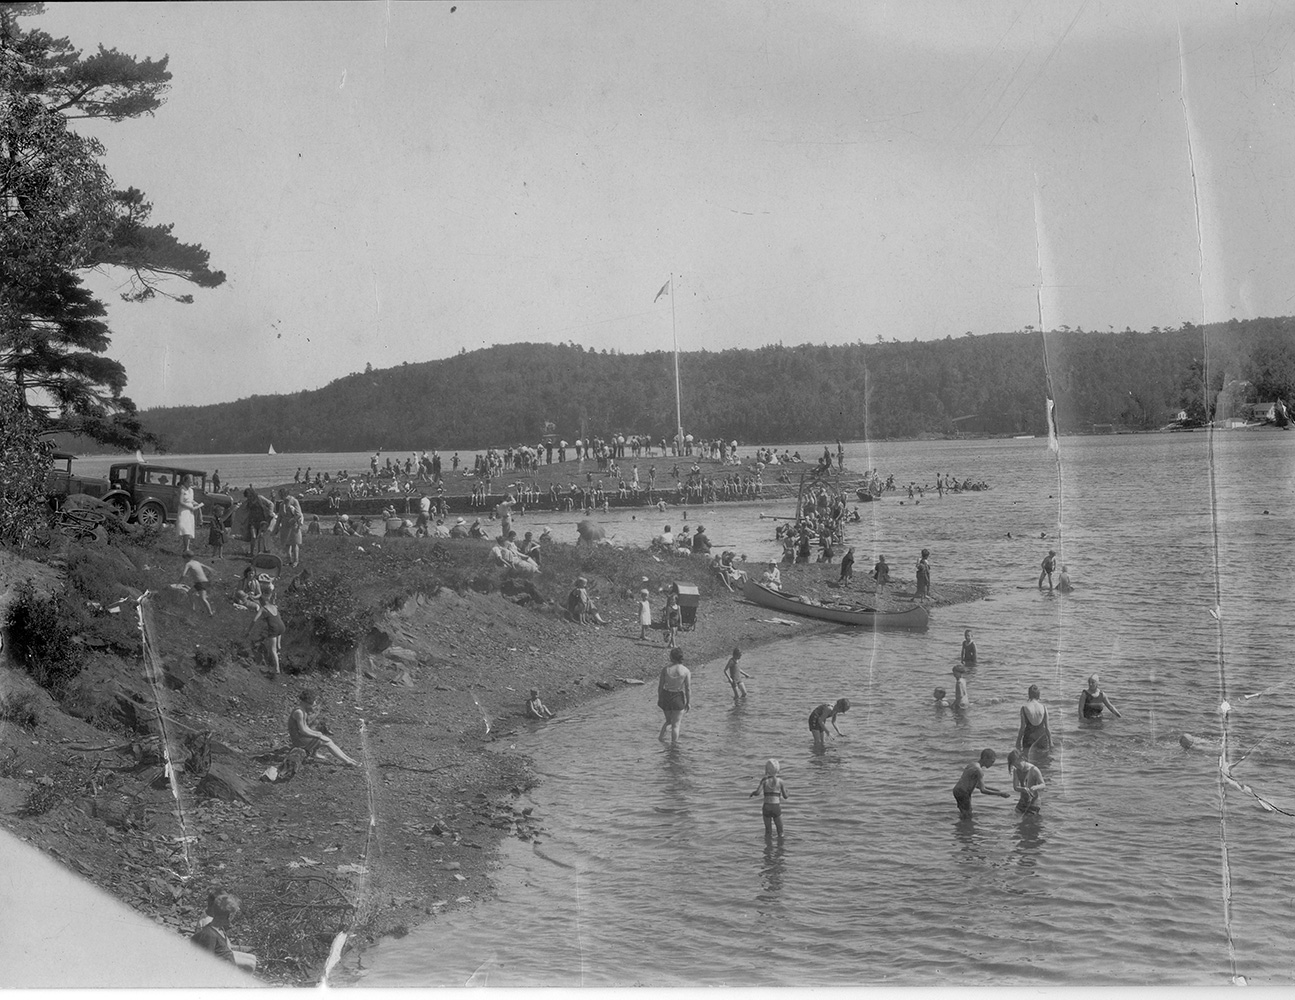 Black and white image of Bathers enjoy the waters of Northwest Arm at Horseshoe Island on Regatta Day, 1912 [102-106-1-7 (cropped from original)]